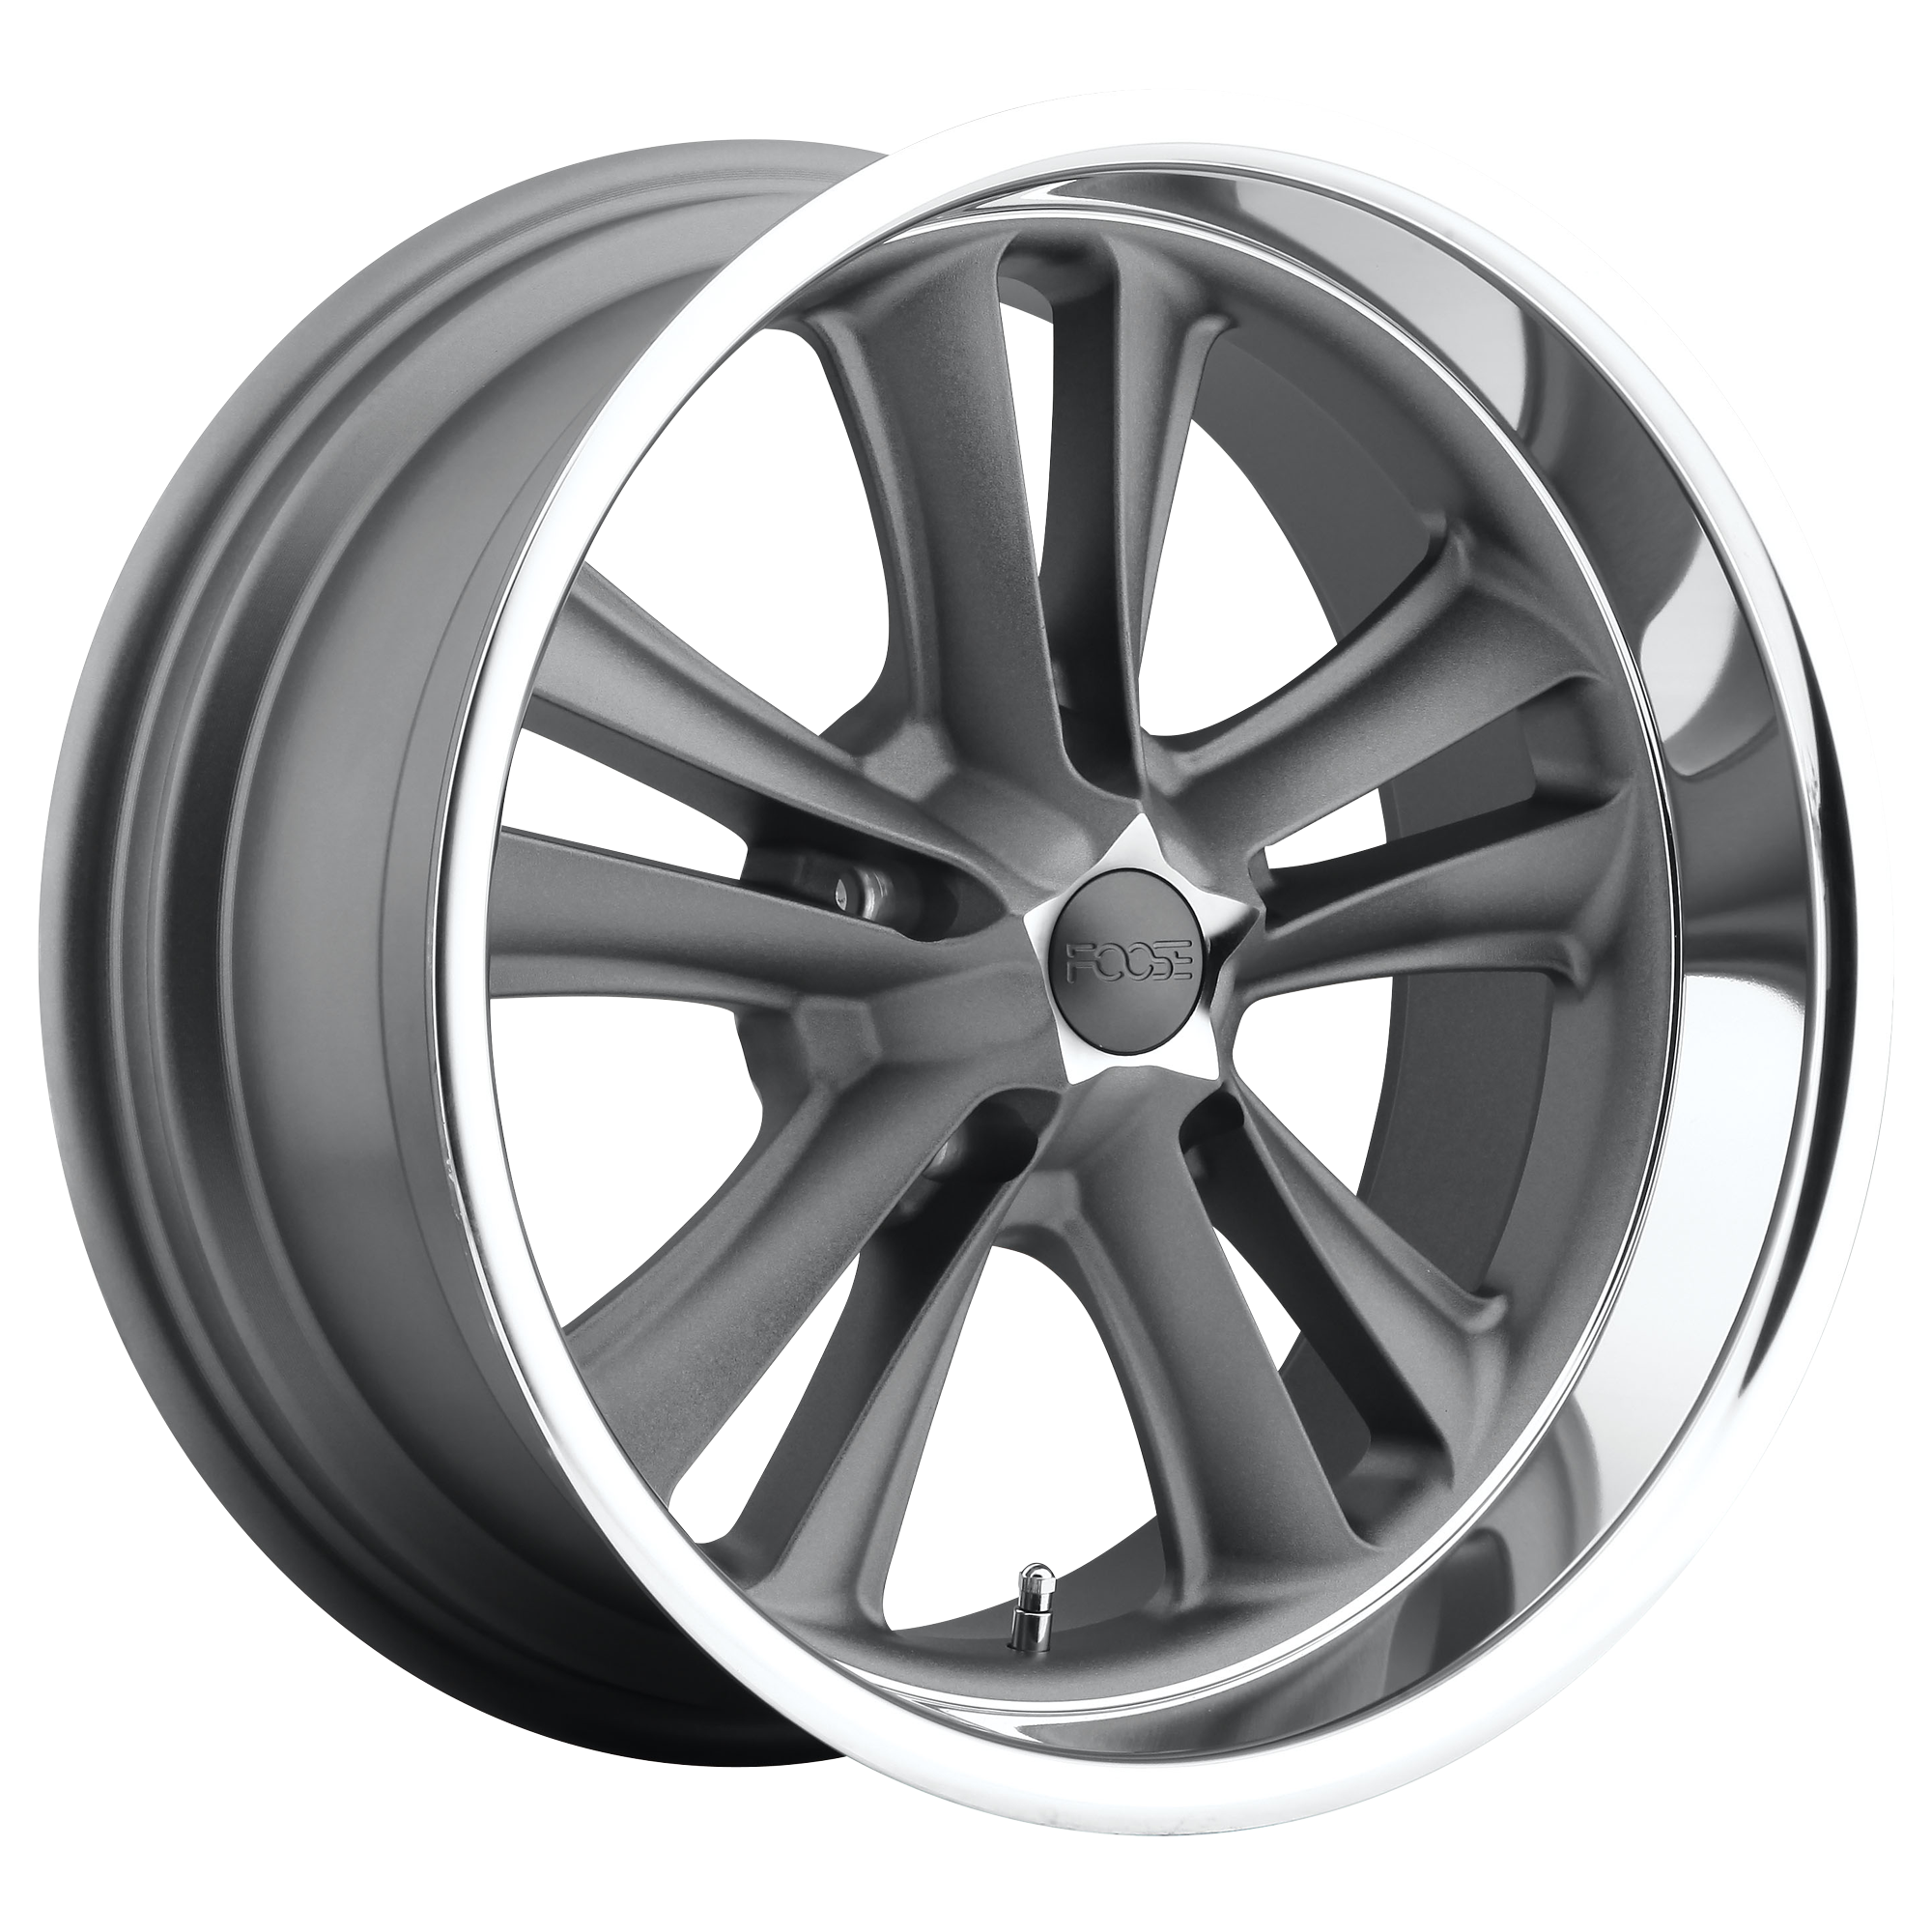 KNUCKLE 17x7 5x114.30 MATTE GUN METAL MACHINED (1 mm) - Tires and Engine Performance